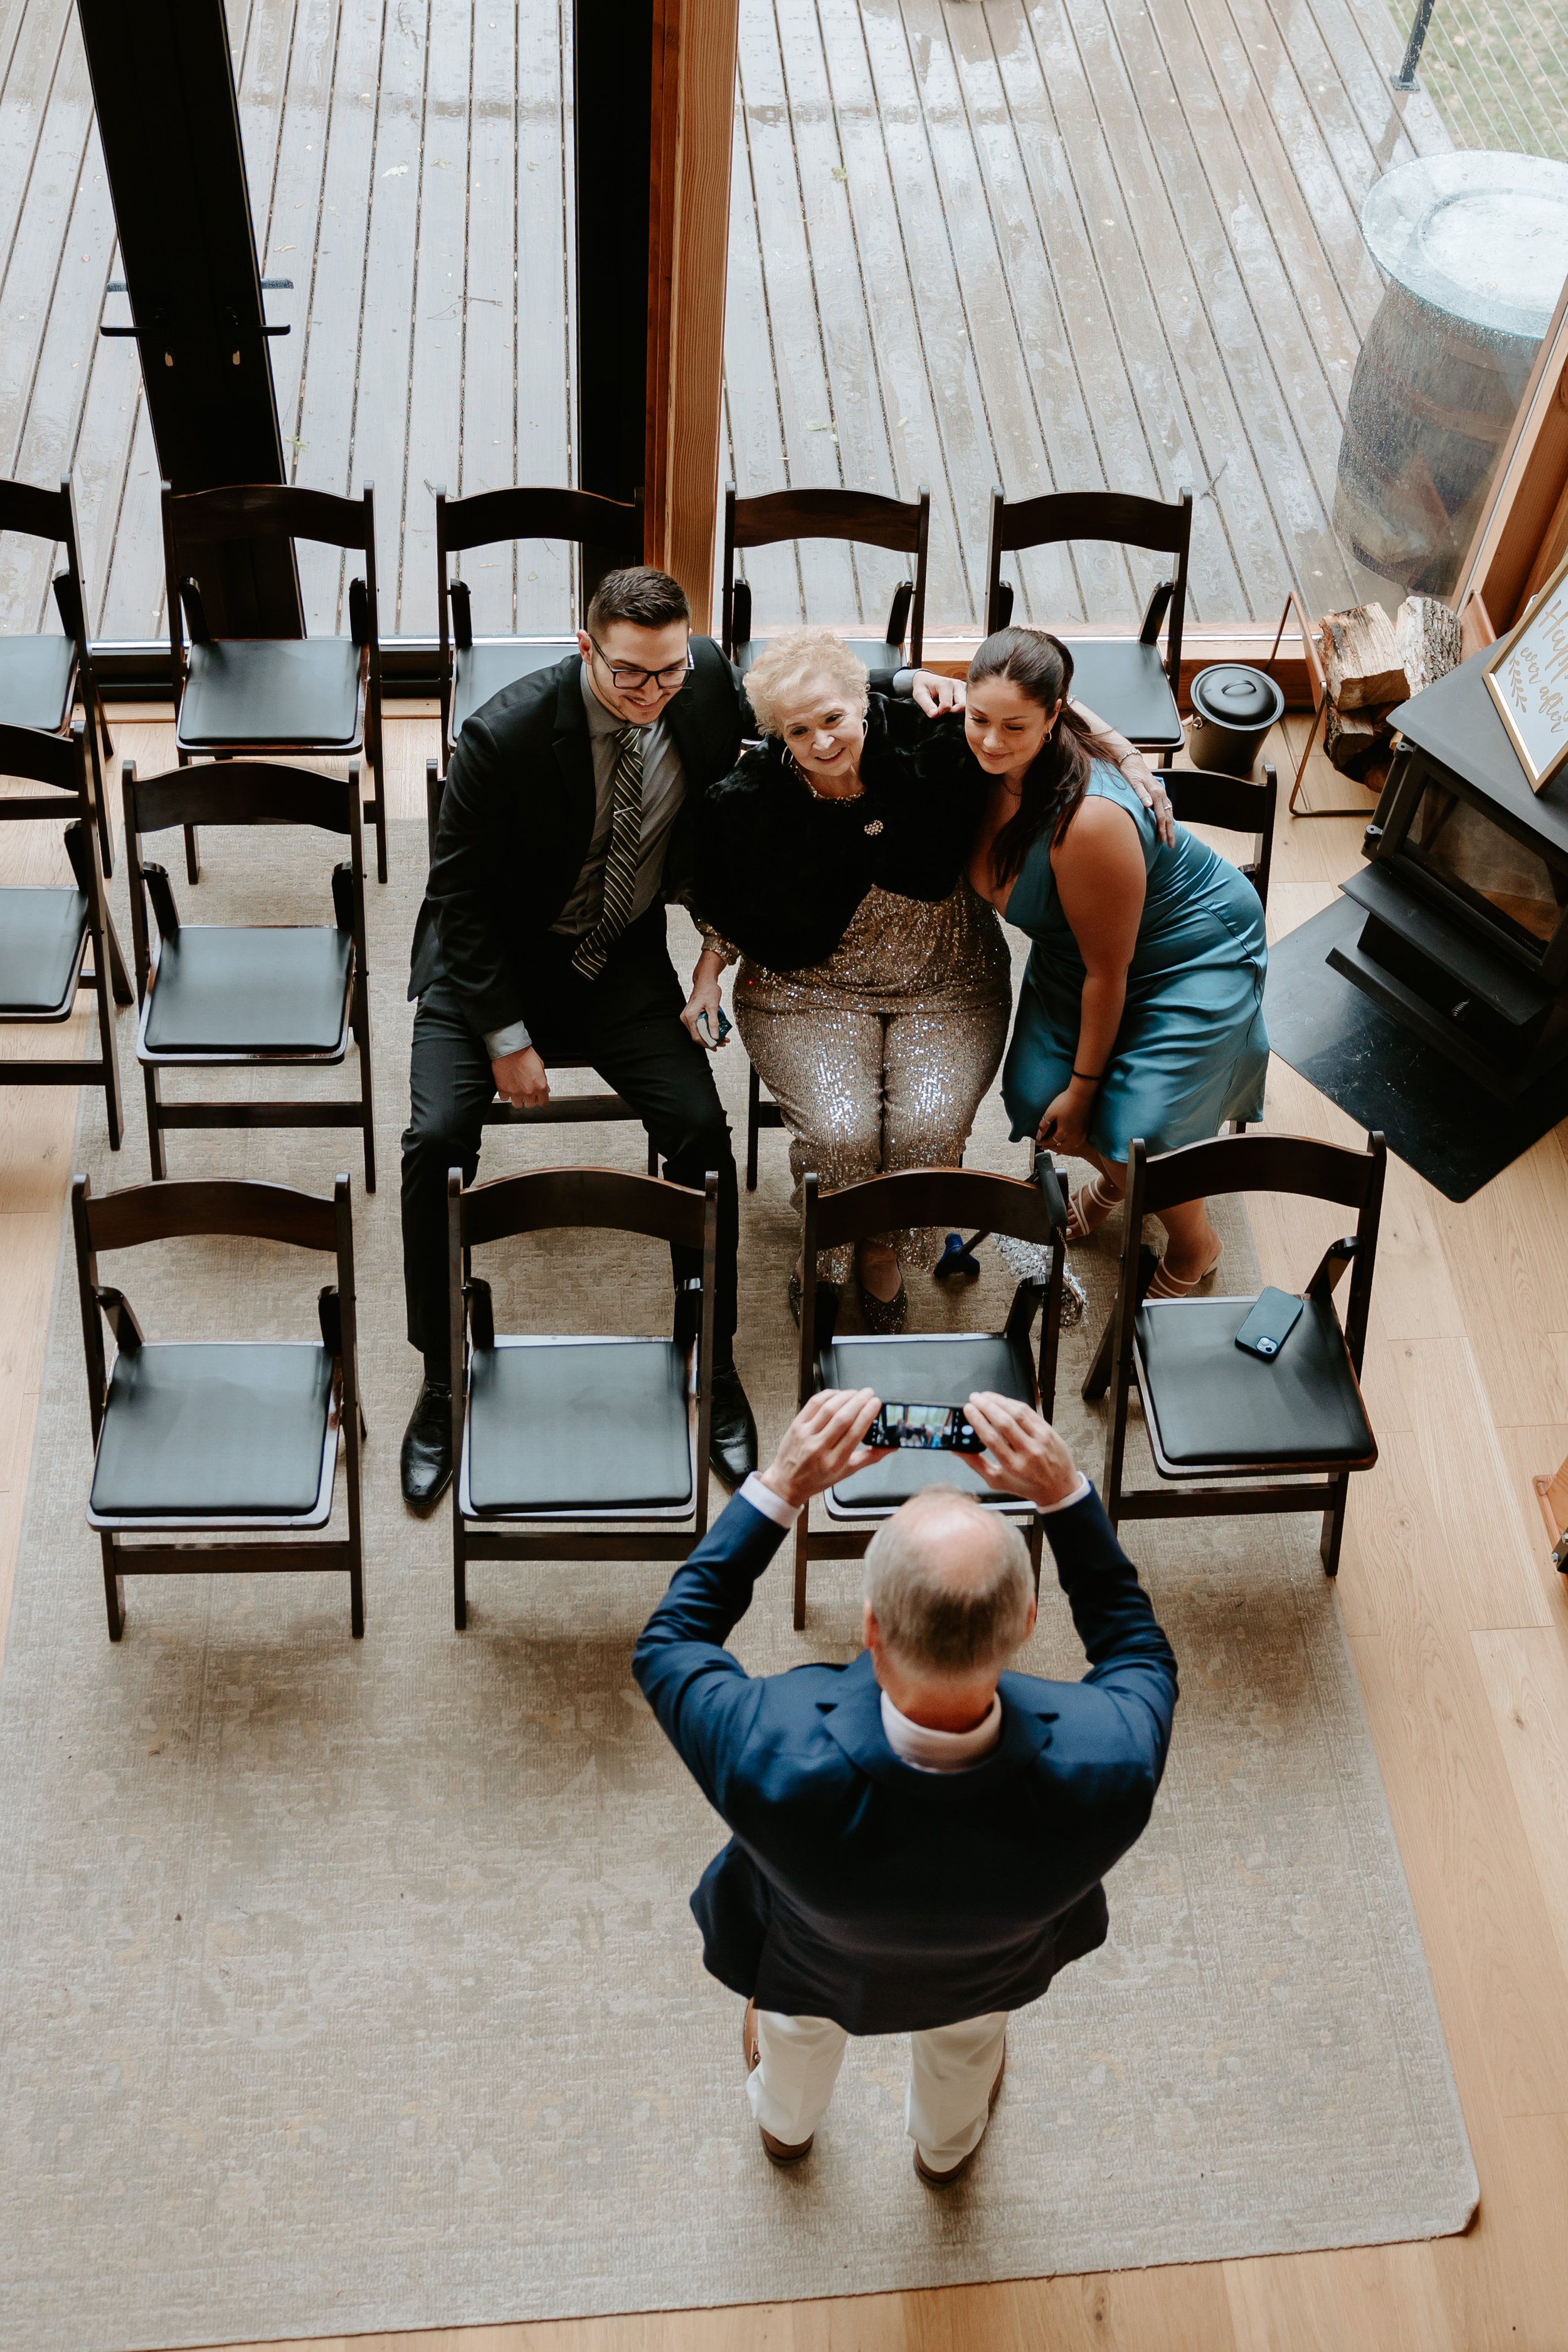 Man takes photo of family members at a wedding.